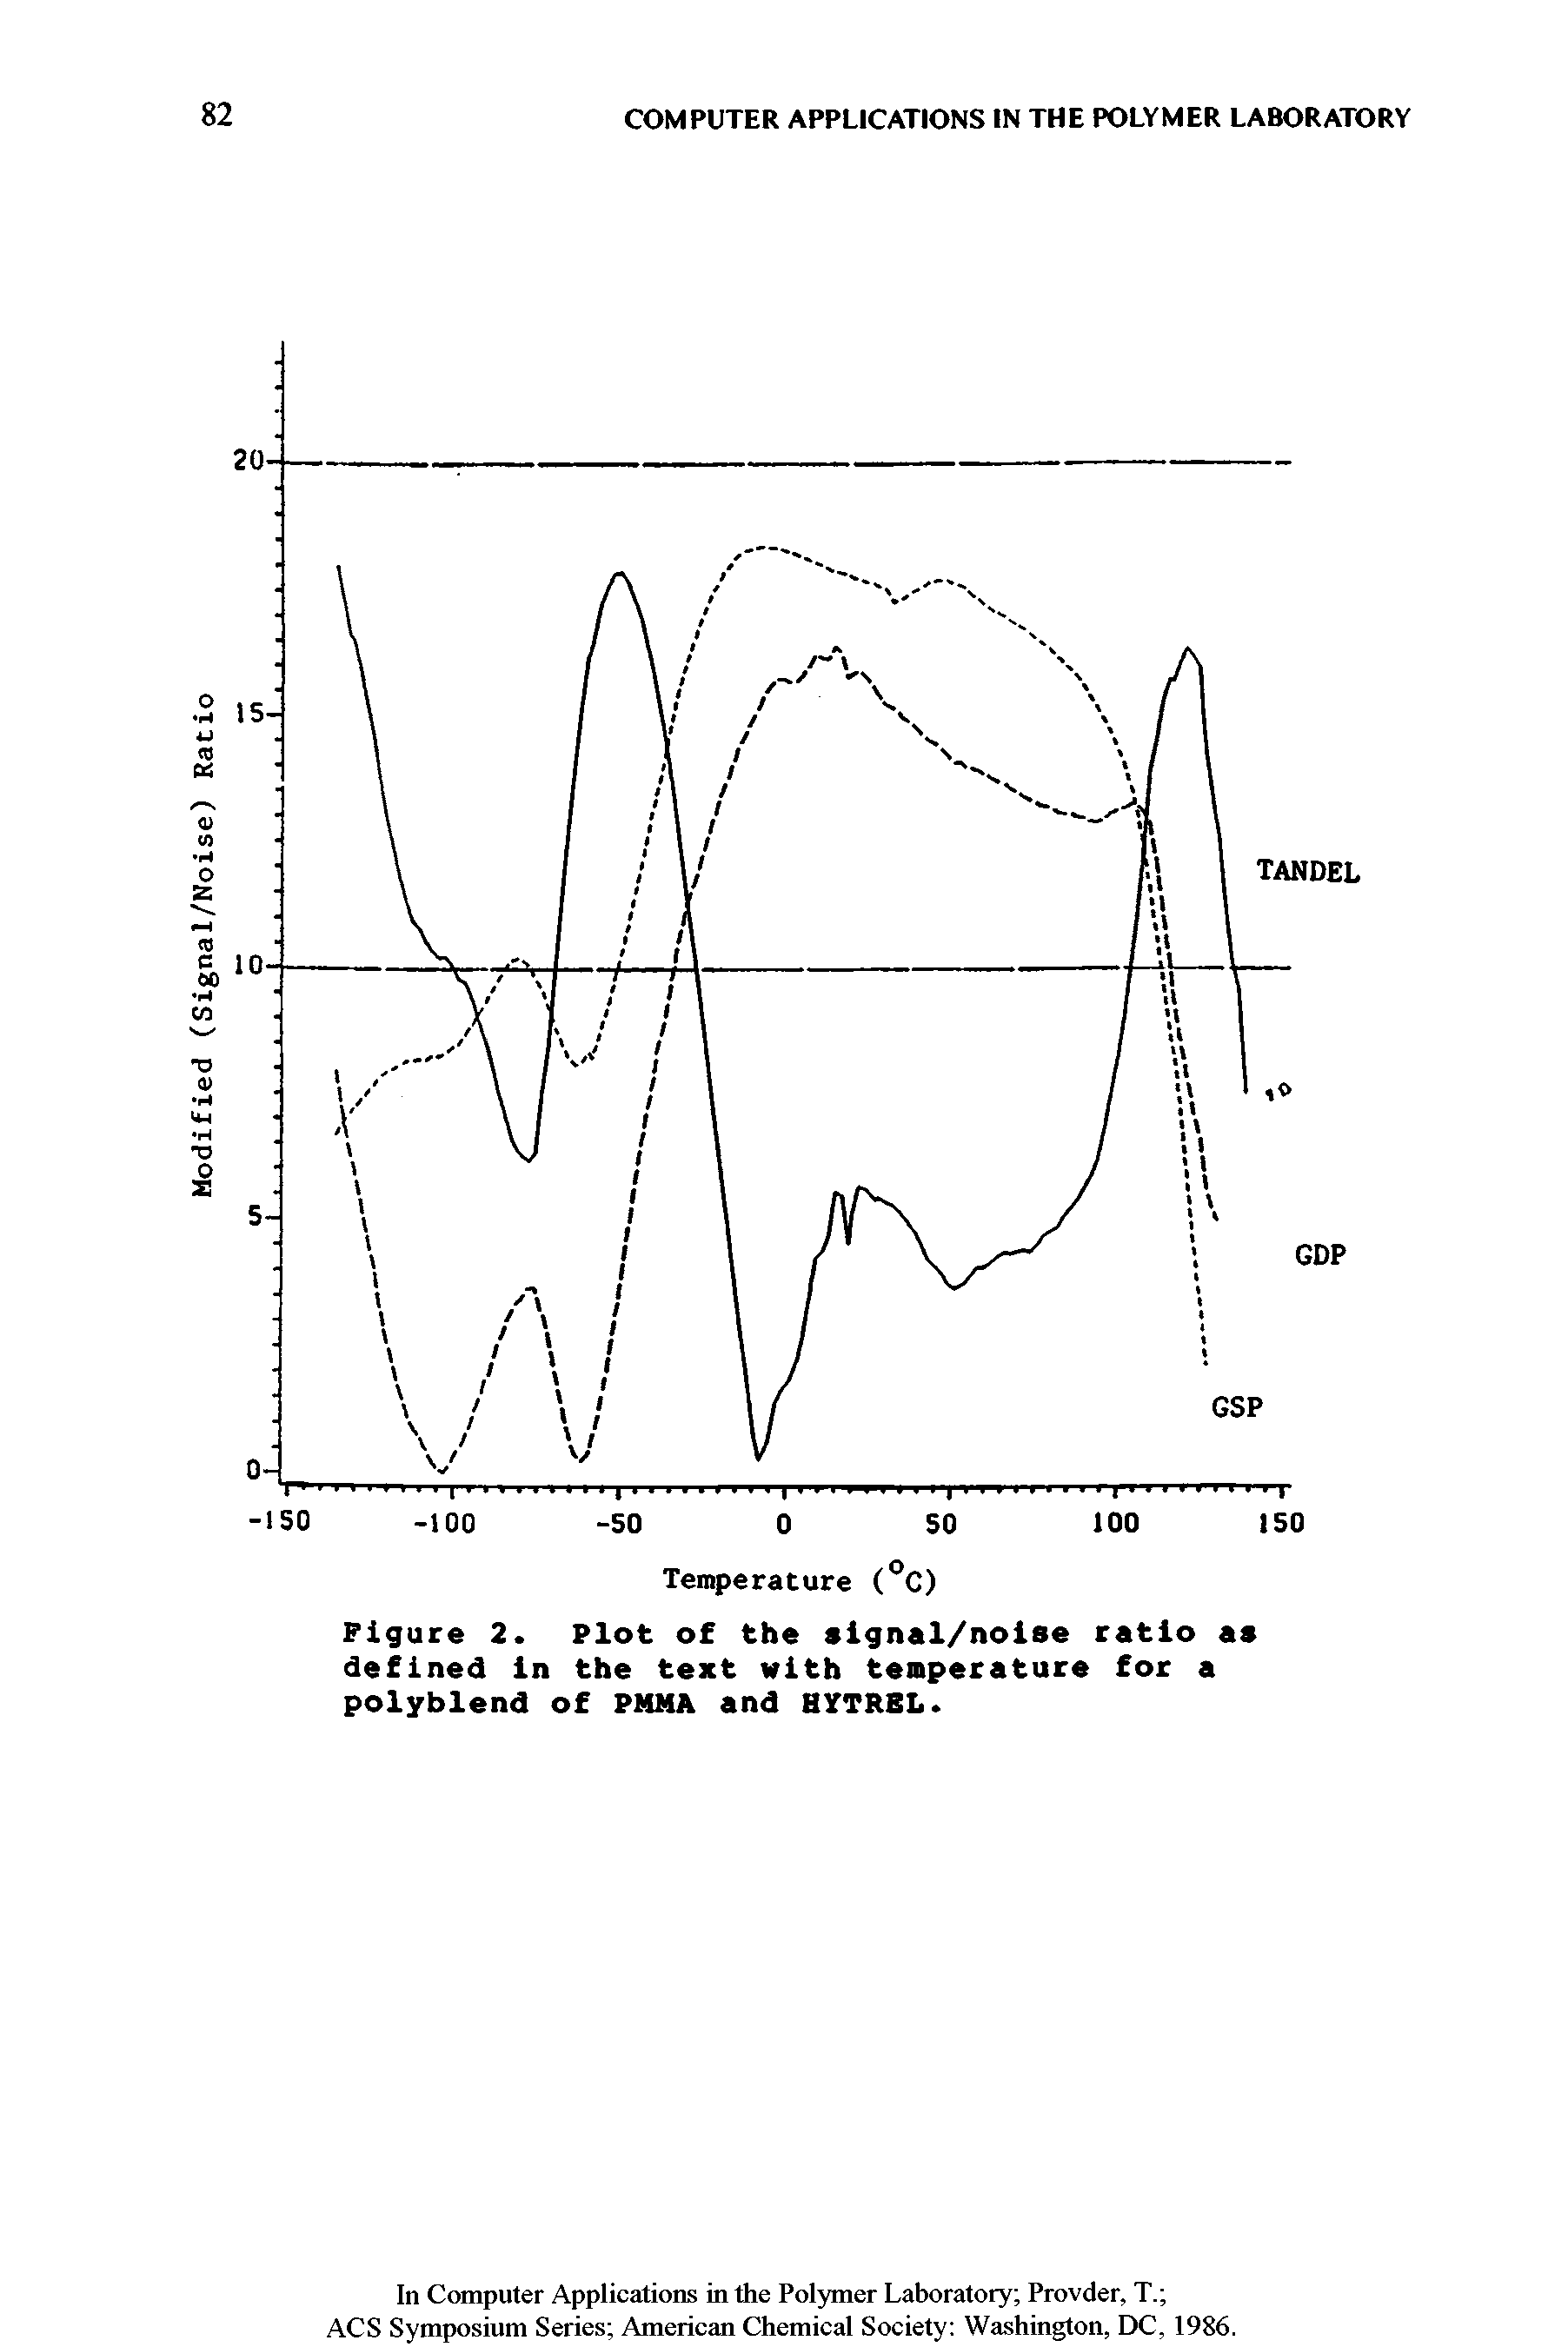 Figure 2. Plot of the signal/noise ratio as defined in the text with temperature for a polyblend of PMMA and HYTRBL.